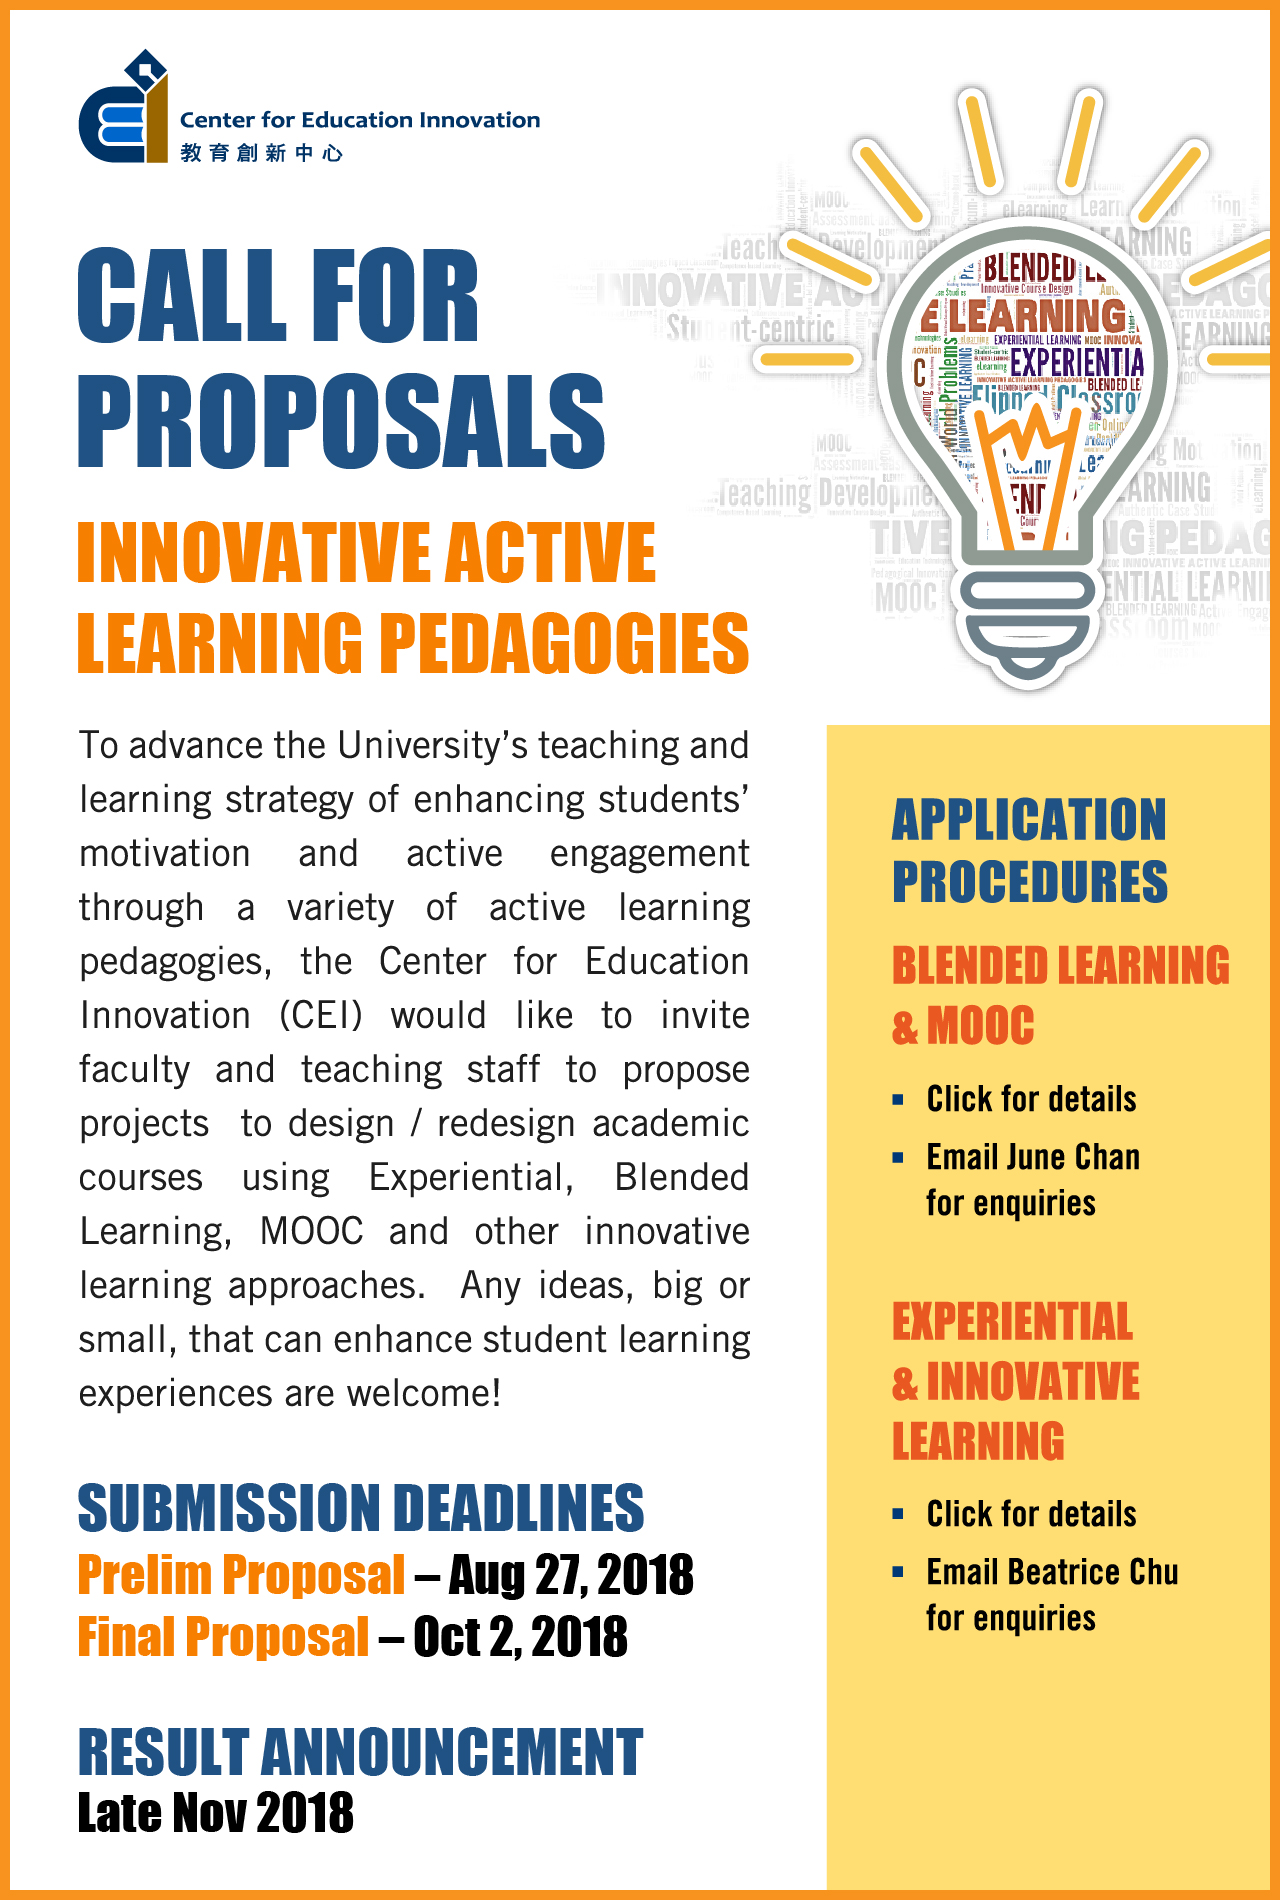 CALL FOR PROPOSALS 2018 | INNOVATIVE ACTIVE LEARNING PEDAGOGIES